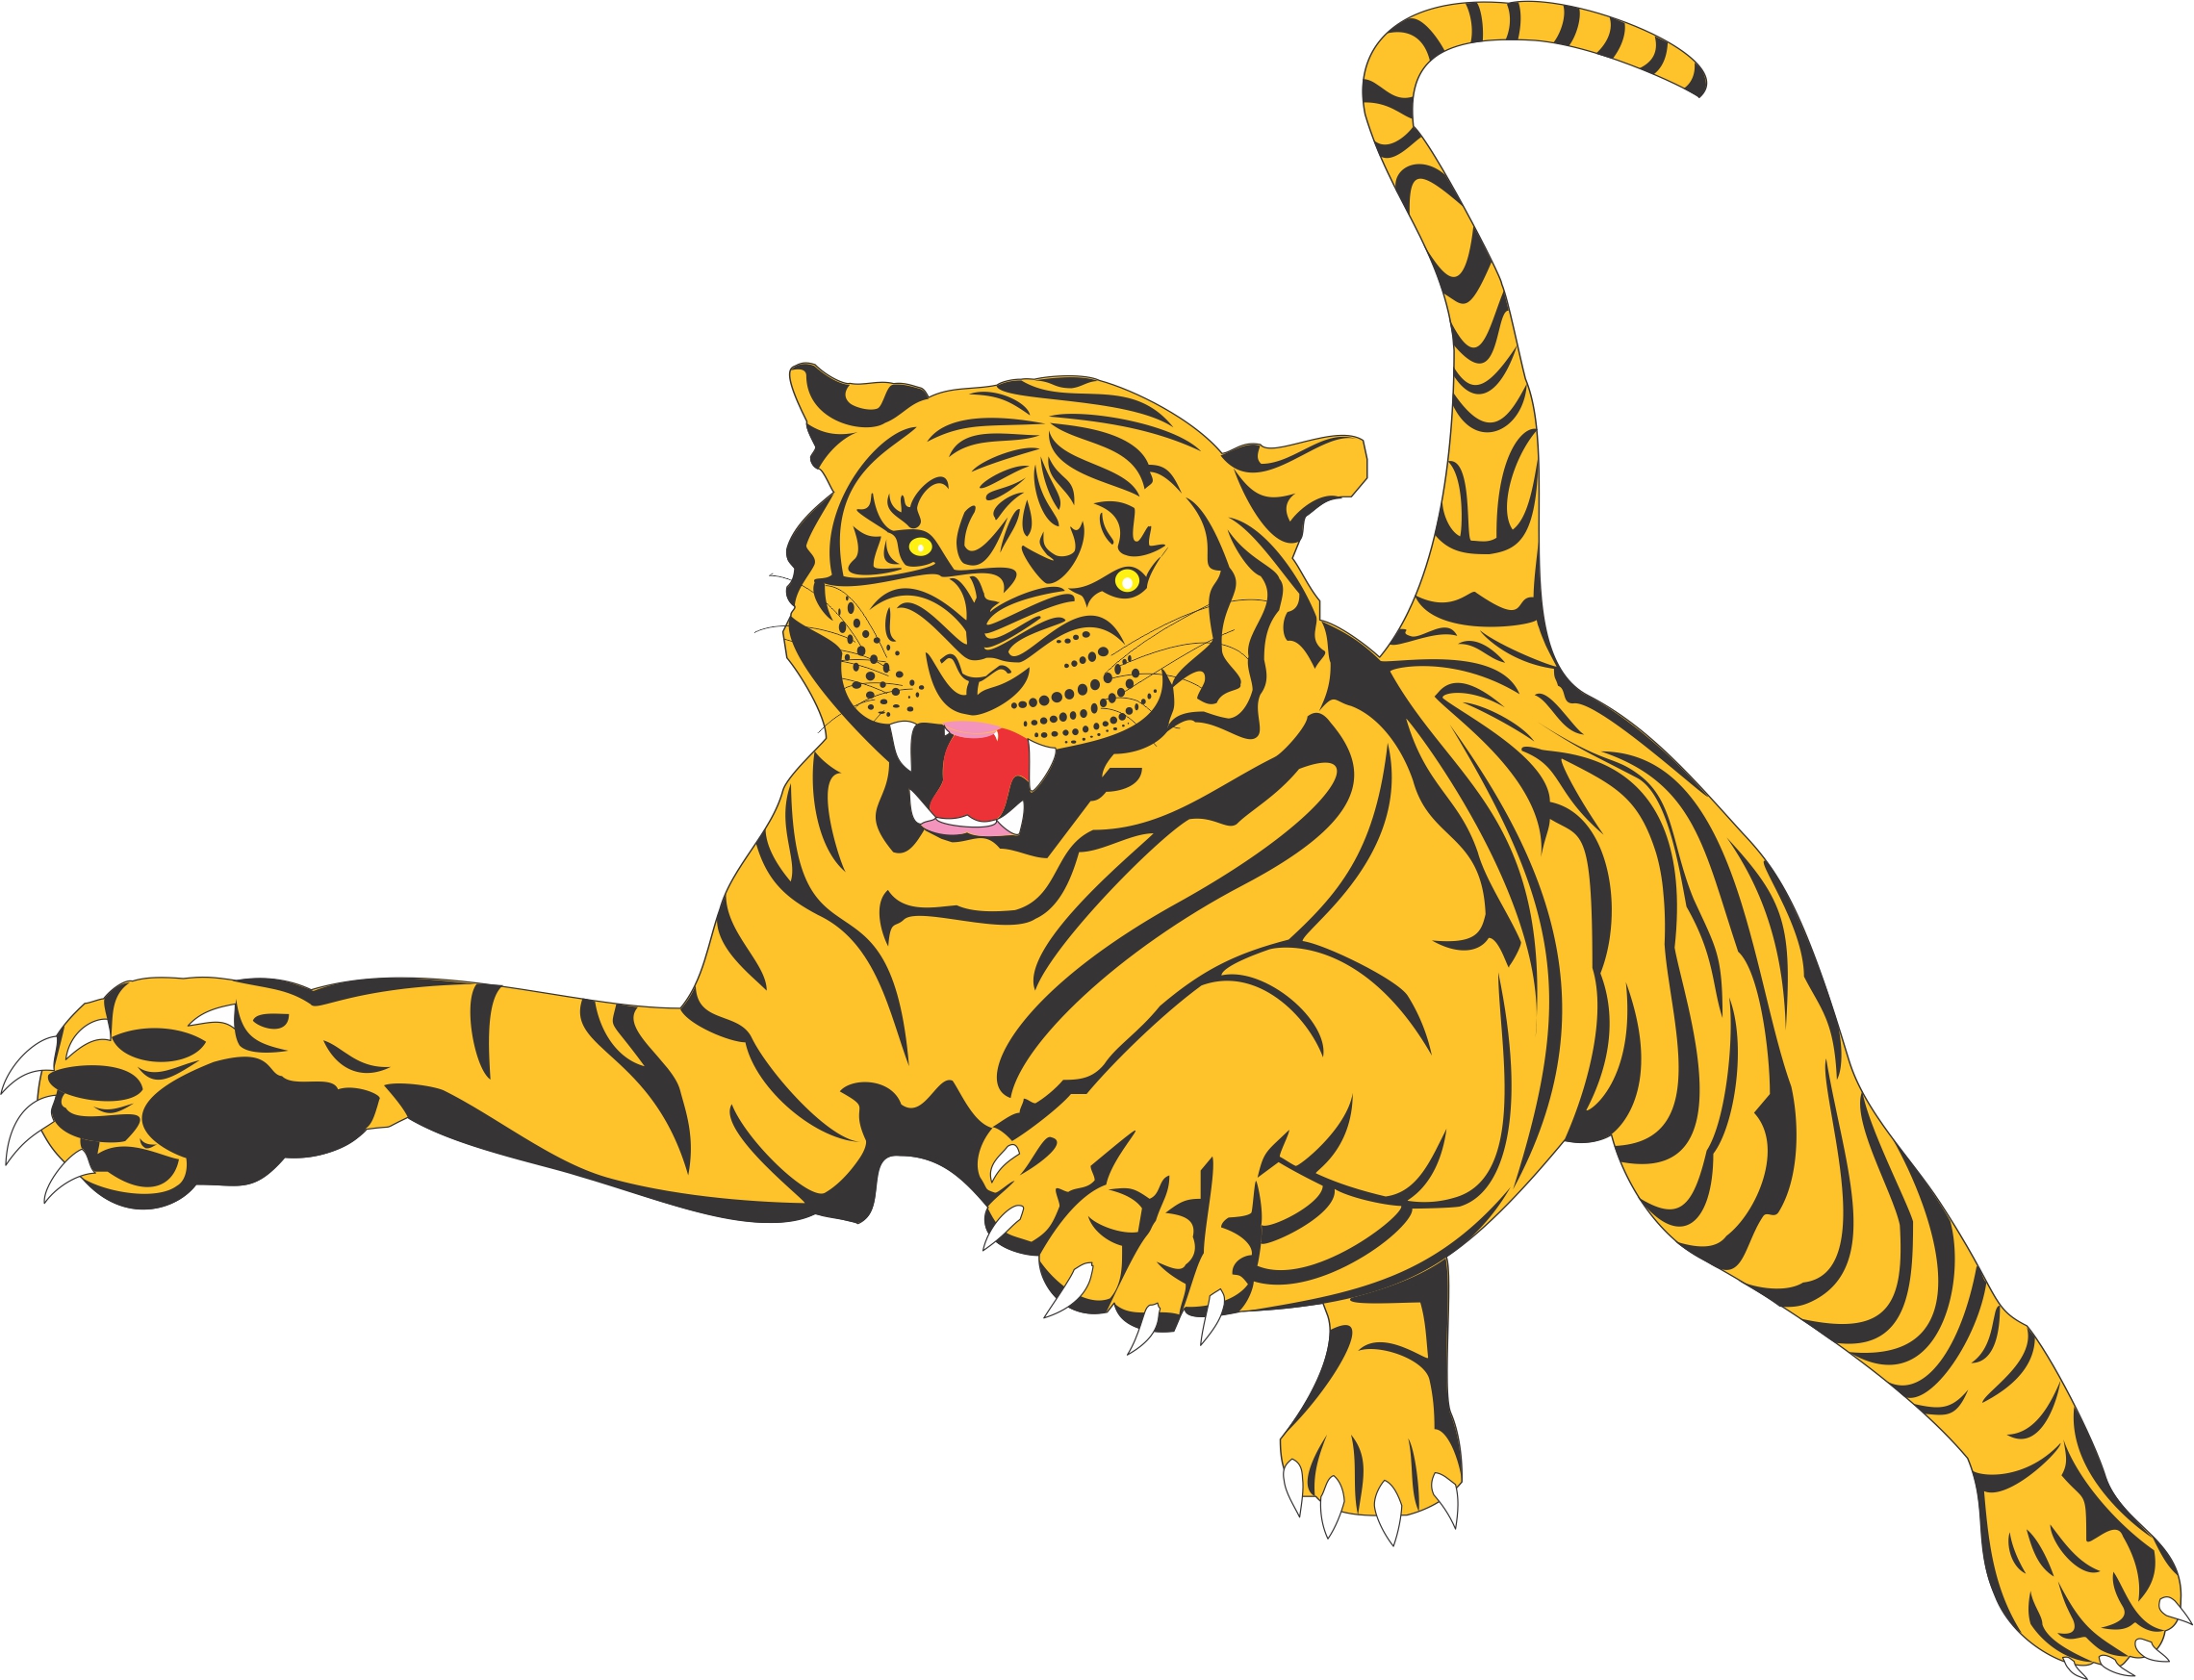 Tiger clipart images 2 image 8 3